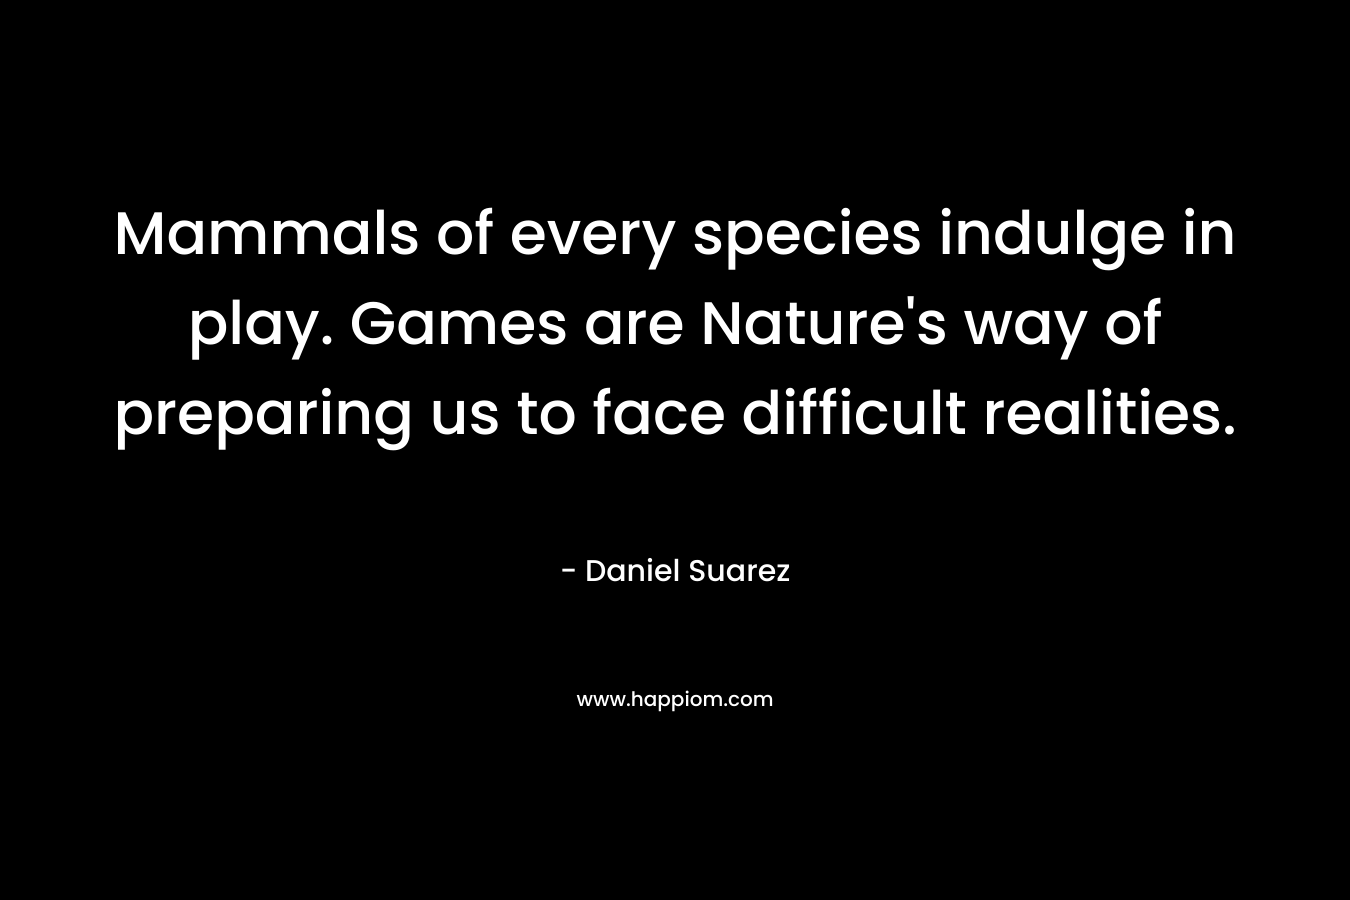 Mammals of every species indulge in play. Games are Nature’s way of preparing us to face difficult realities. – Daniel Suarez